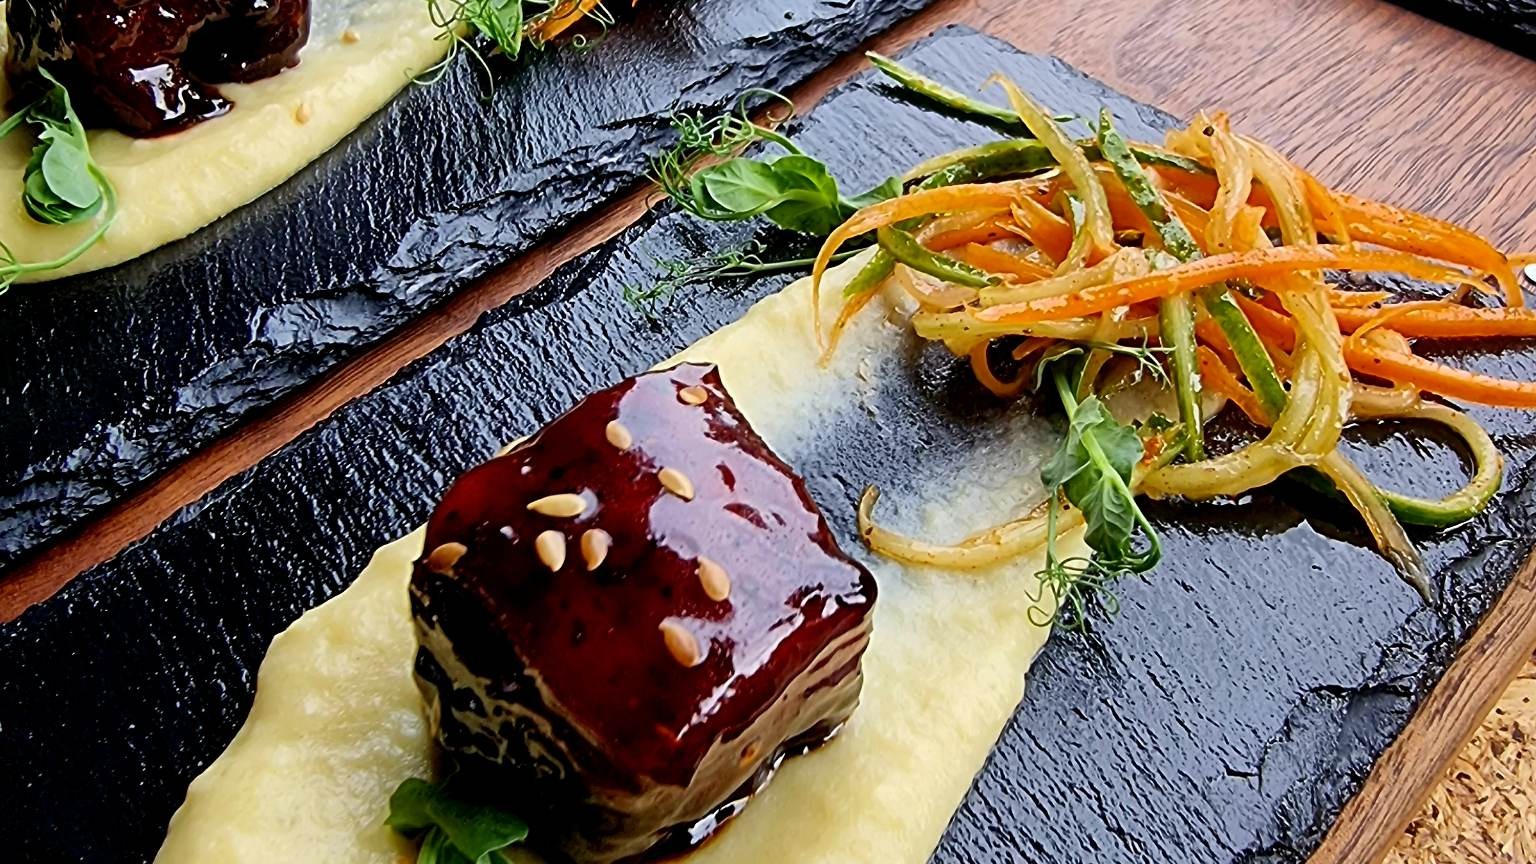 Image of Korean BBQ Pork Belly with apple puree and carrot slaw